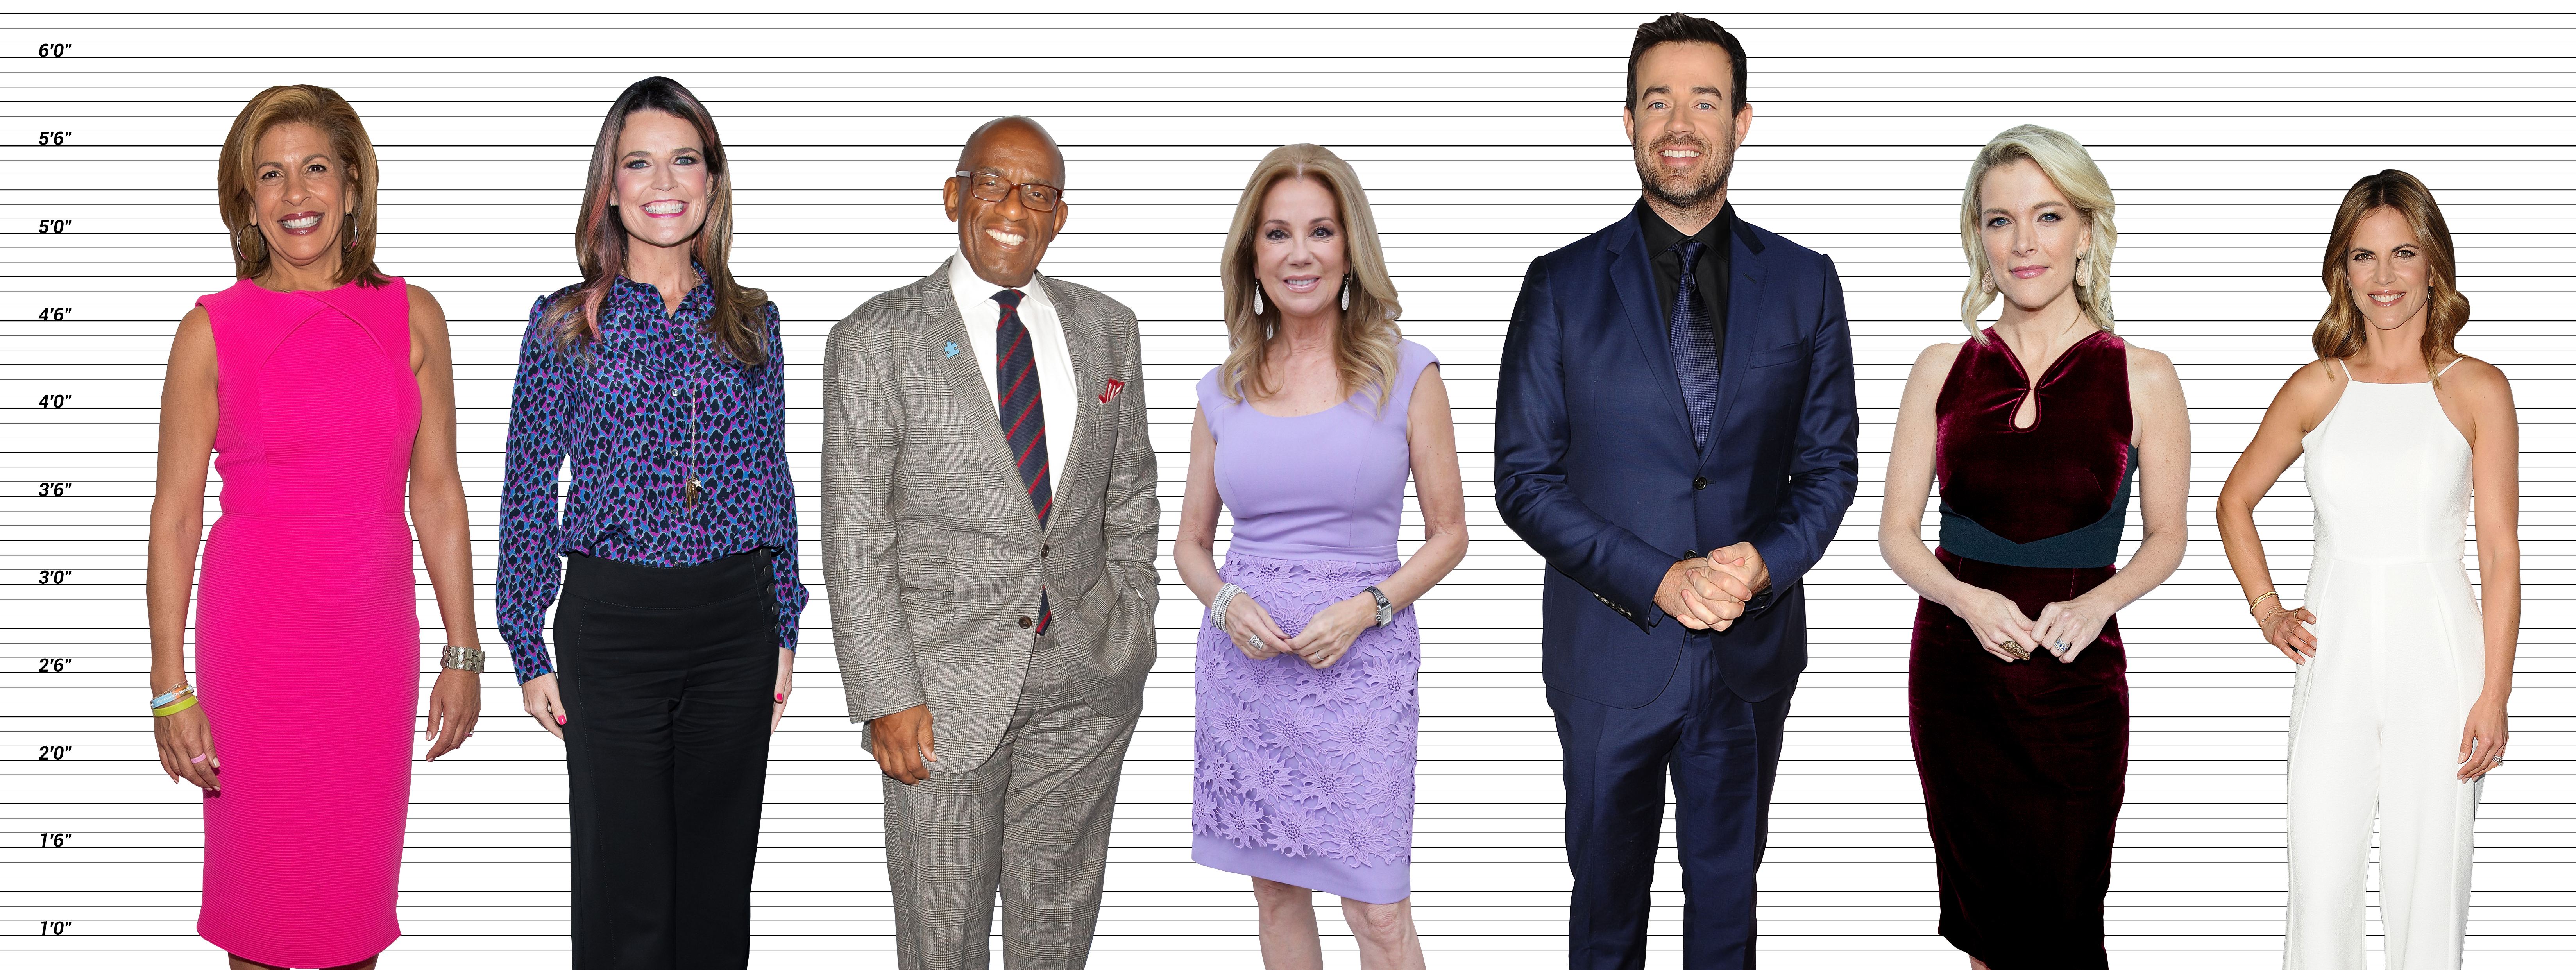 Hollywood Height Chart Female